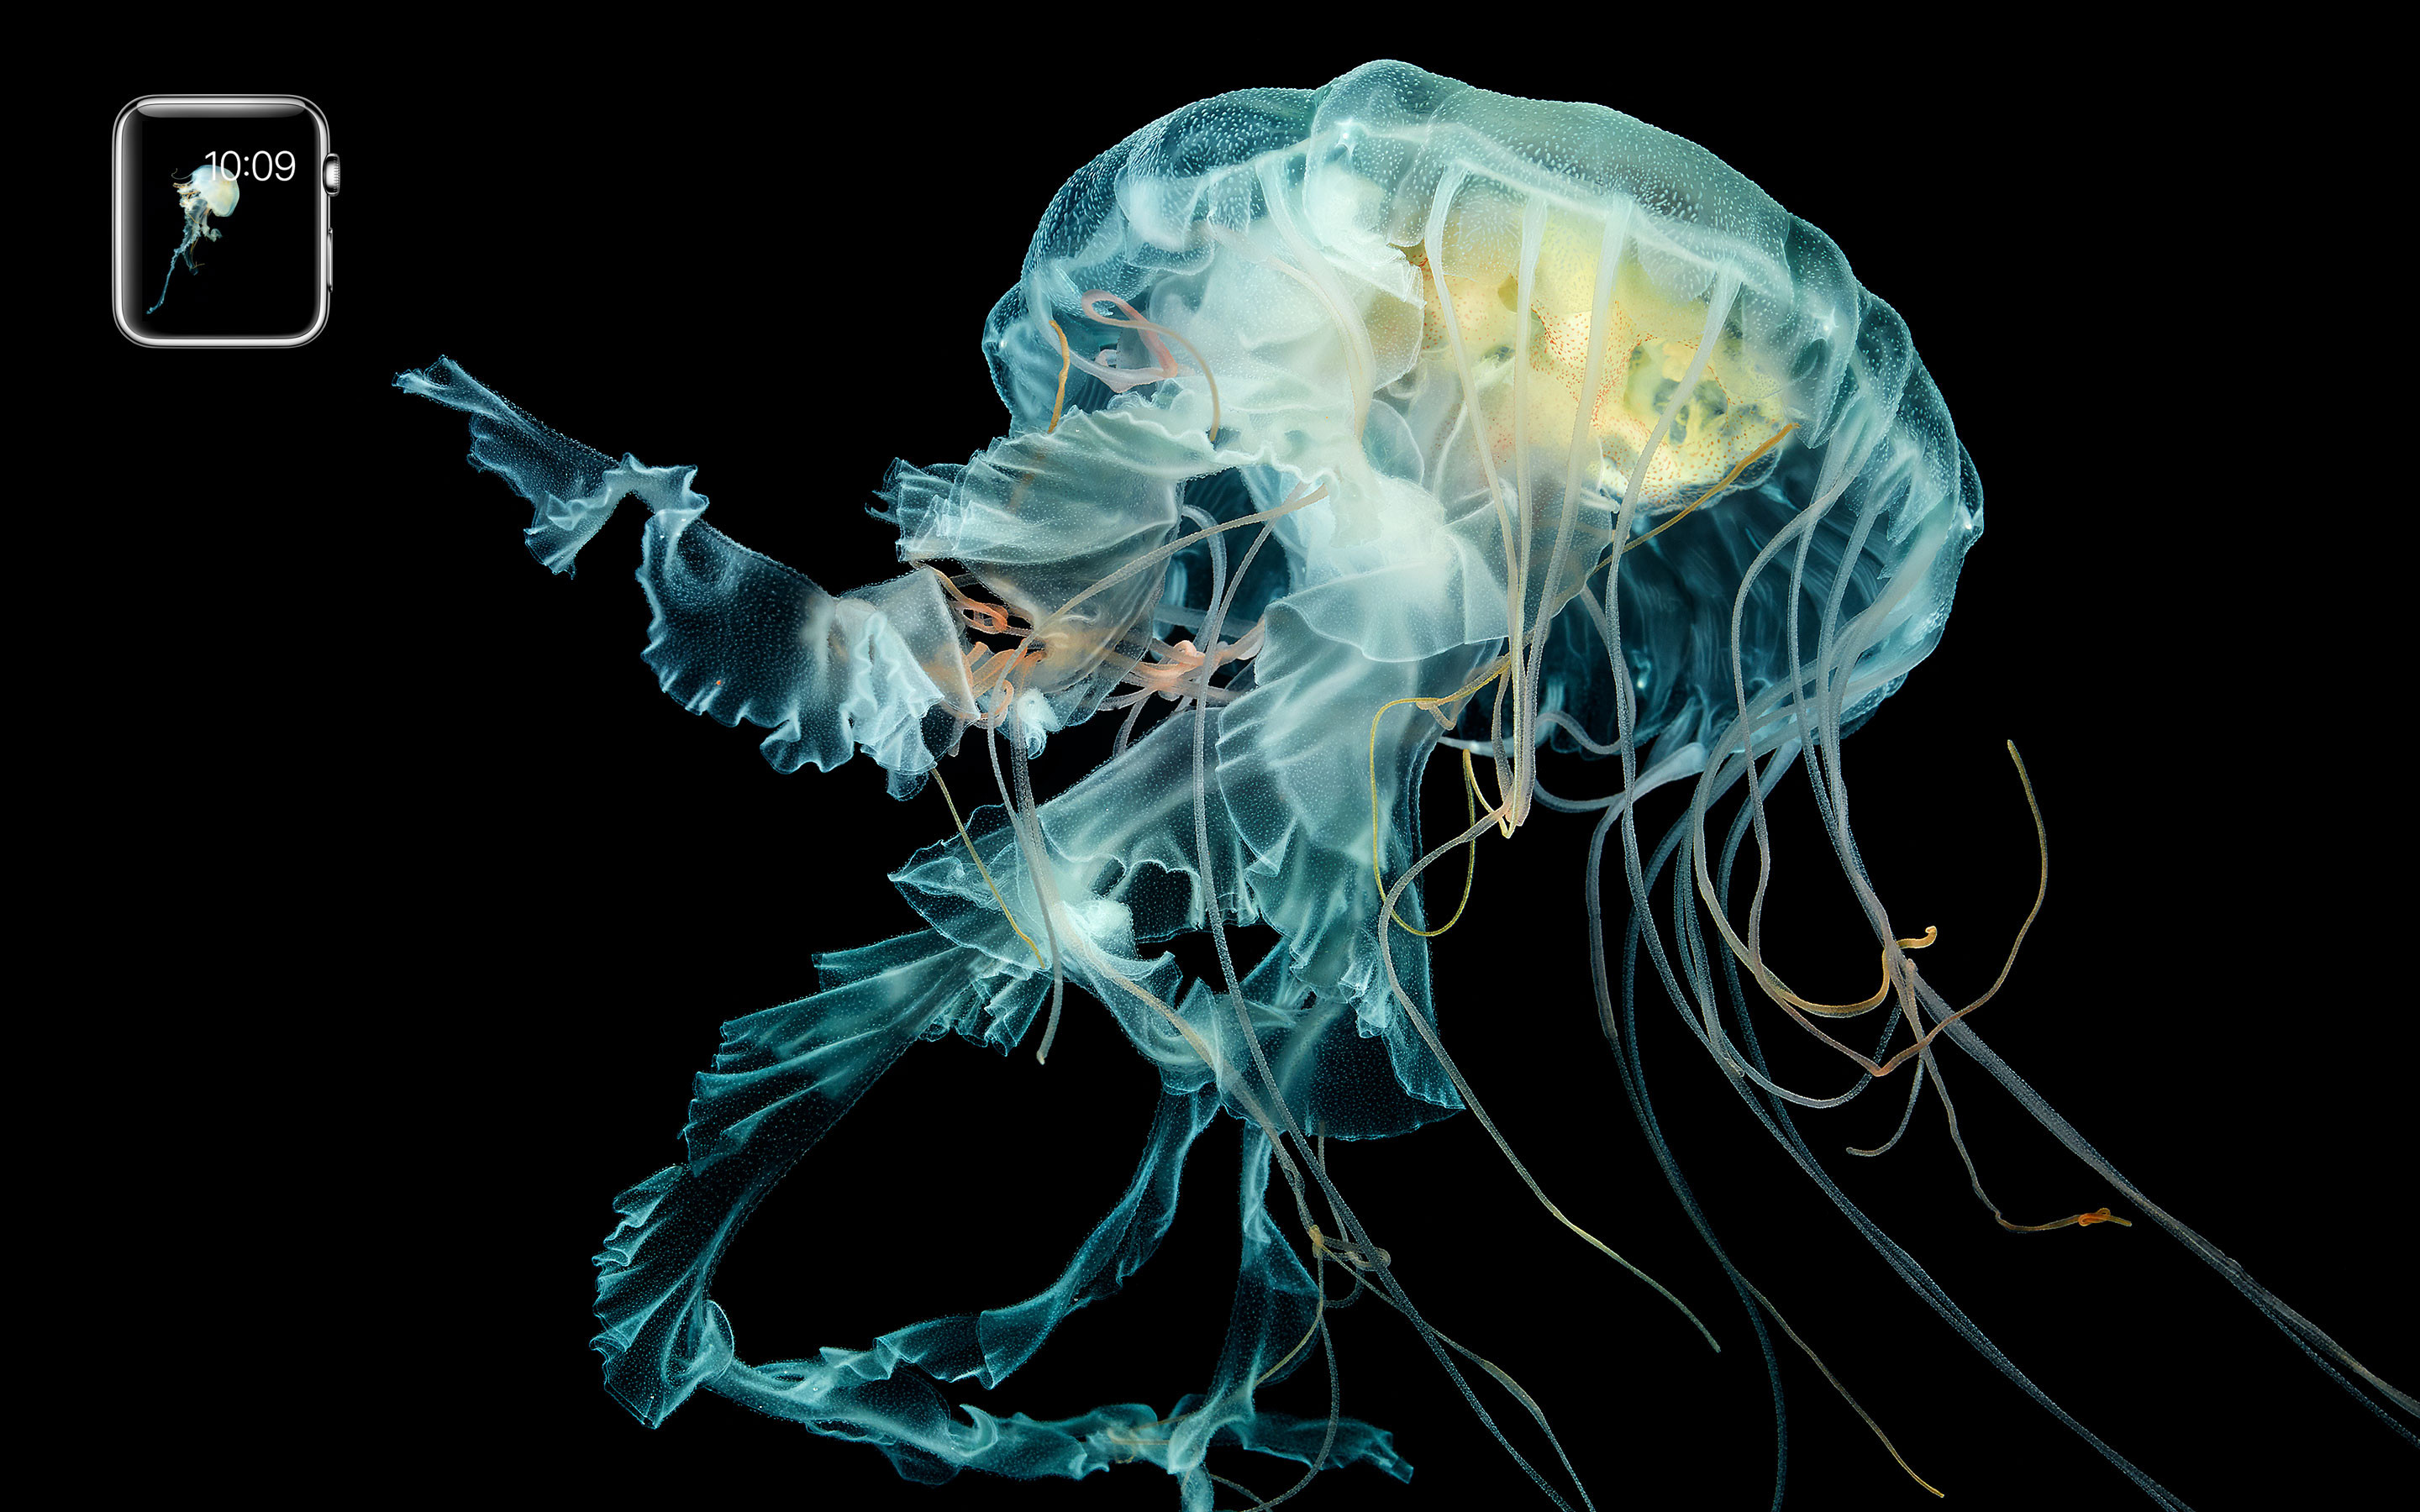 2880x1800 ... Jellyfish Live Wallpaper - Android Apps on Google Play ...